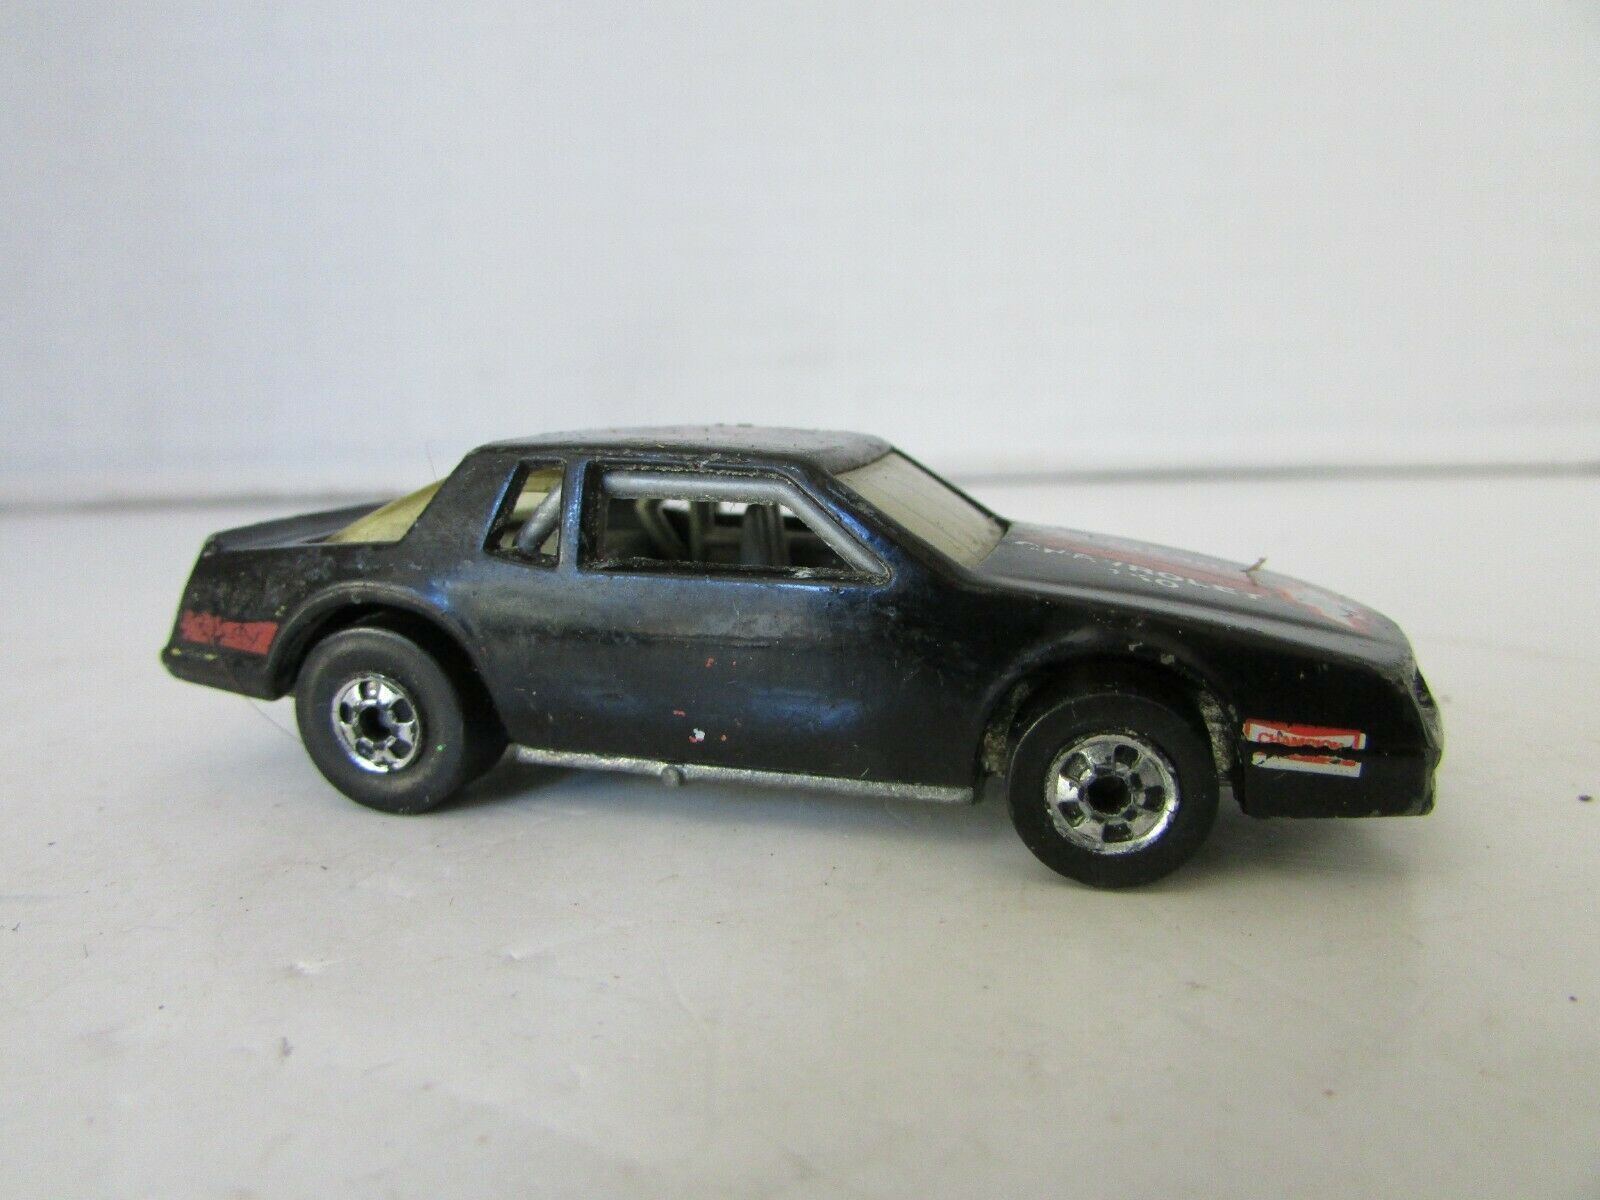 Primary image for MATTEL DIECAST CAR 1988 CHEVROLET 350 BLACK STOCK CAR  #3 MALAYSIA 3" L  H2